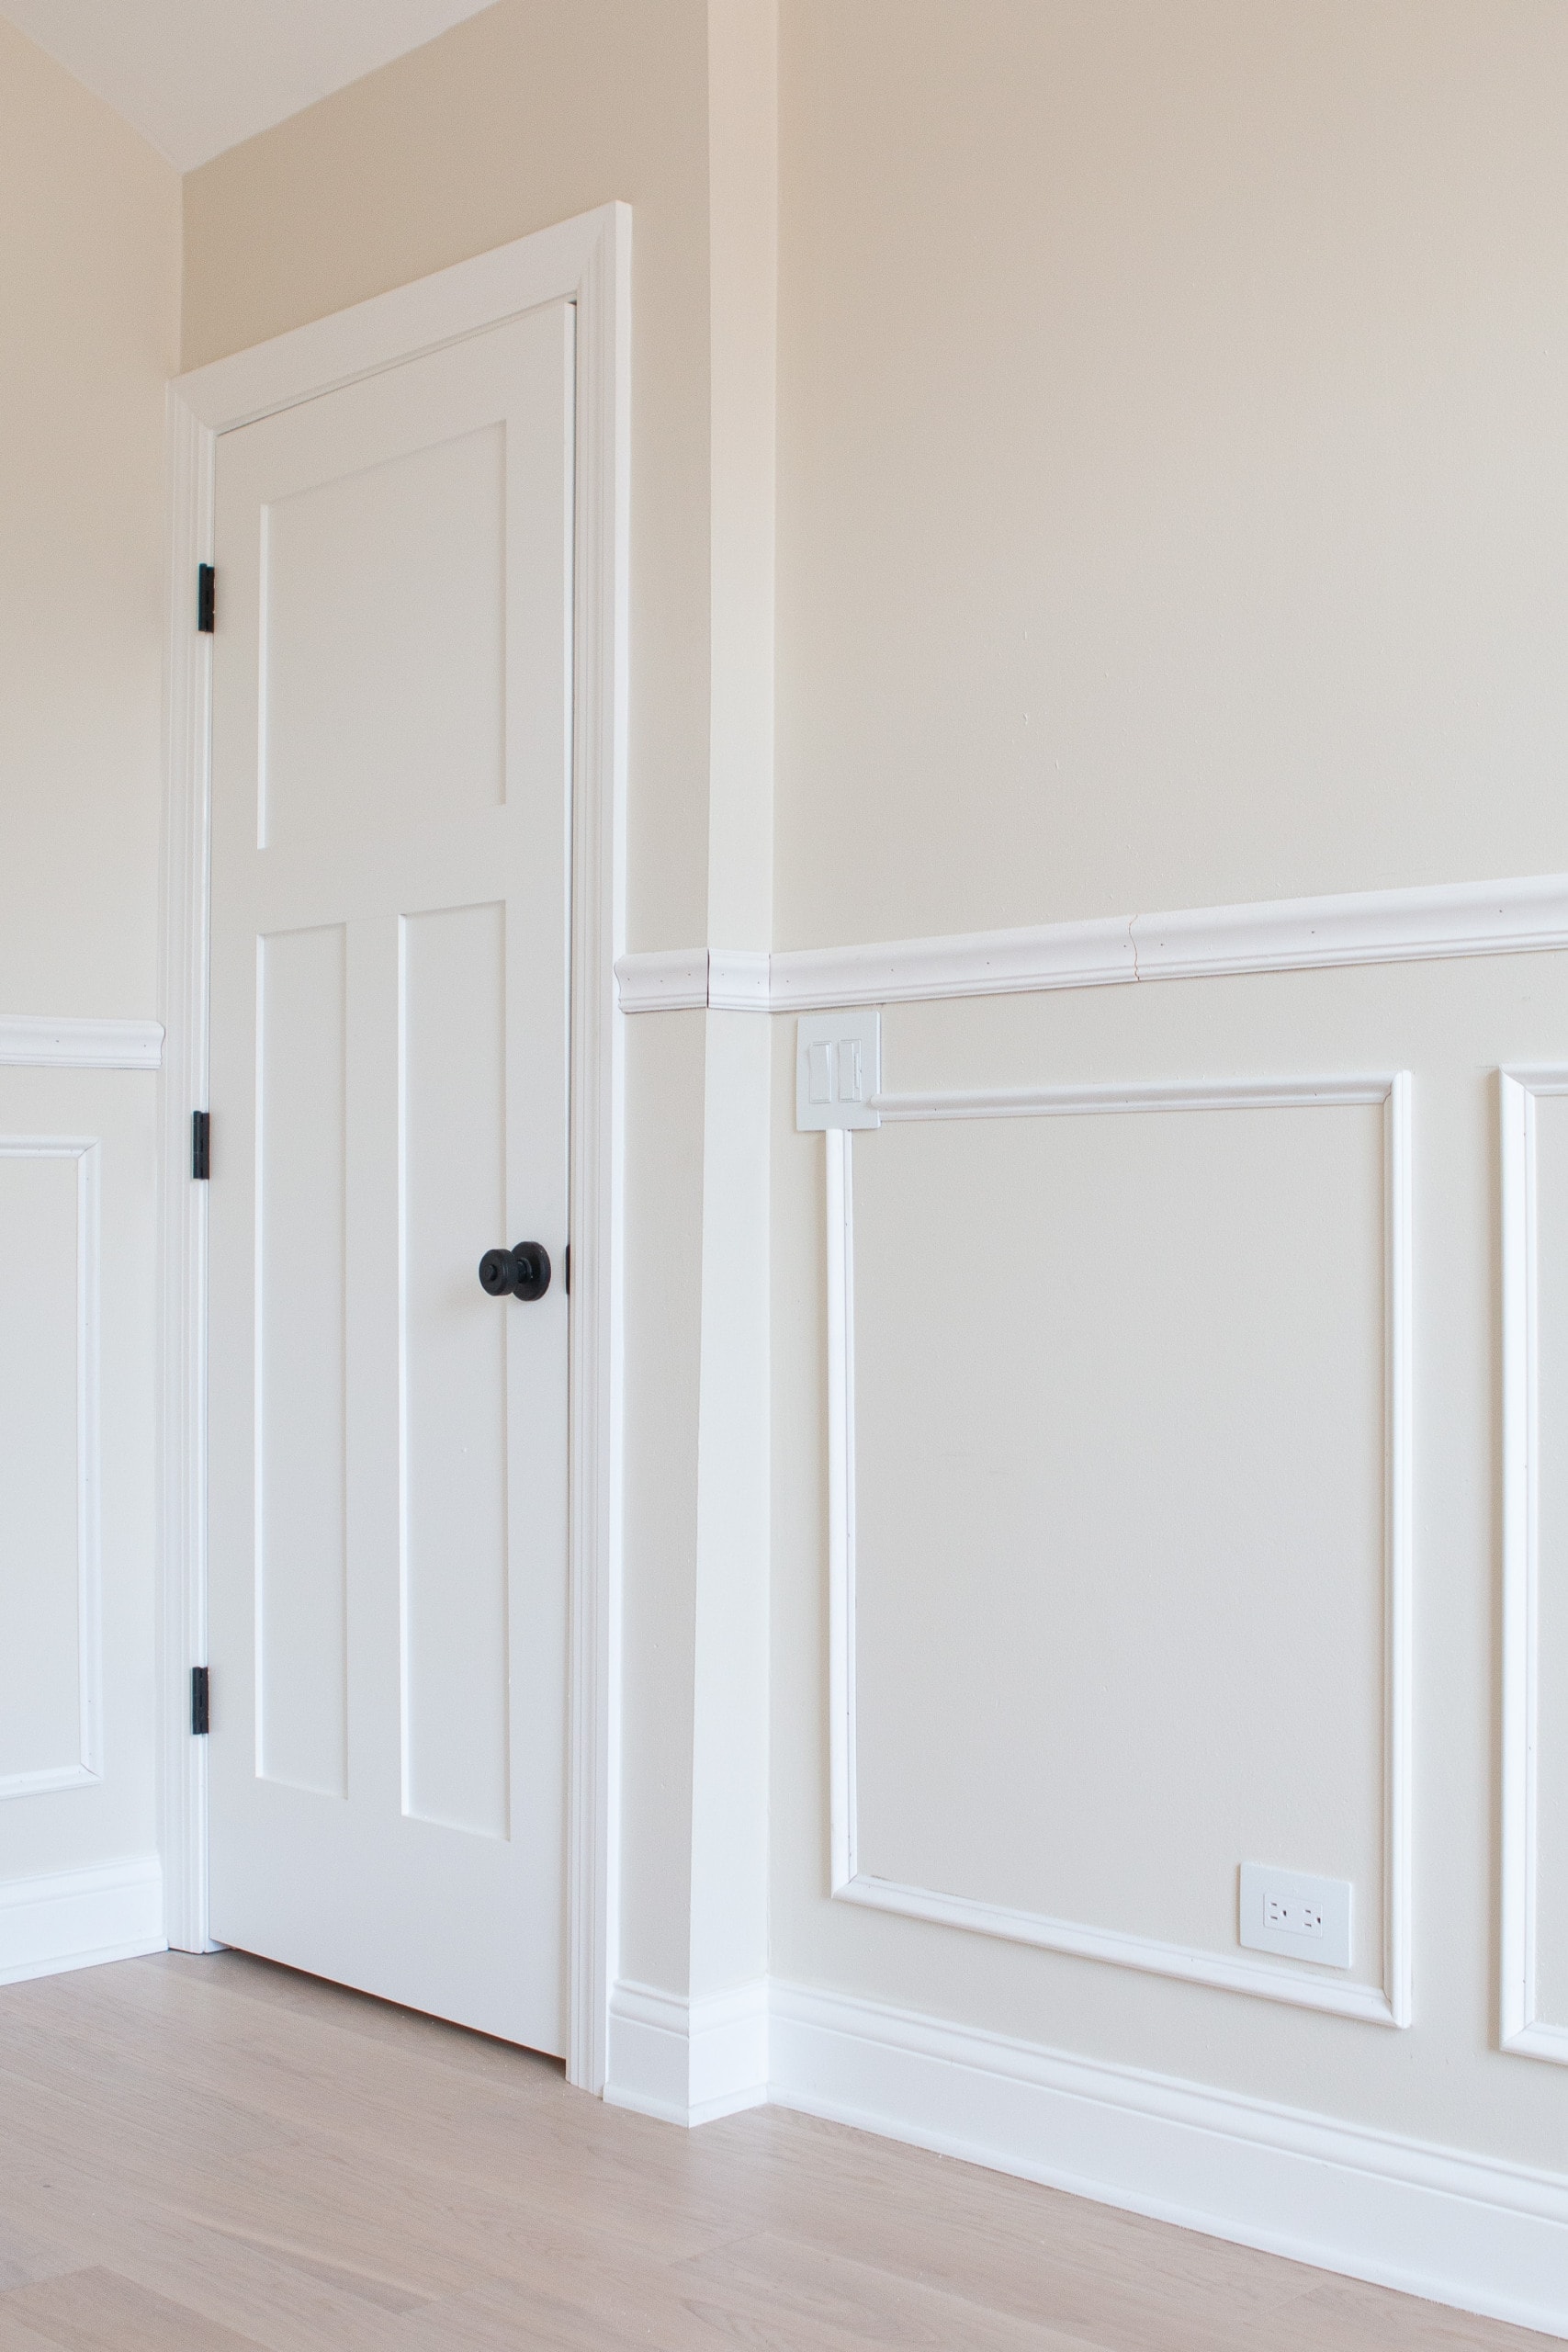 How to add picture frame molding